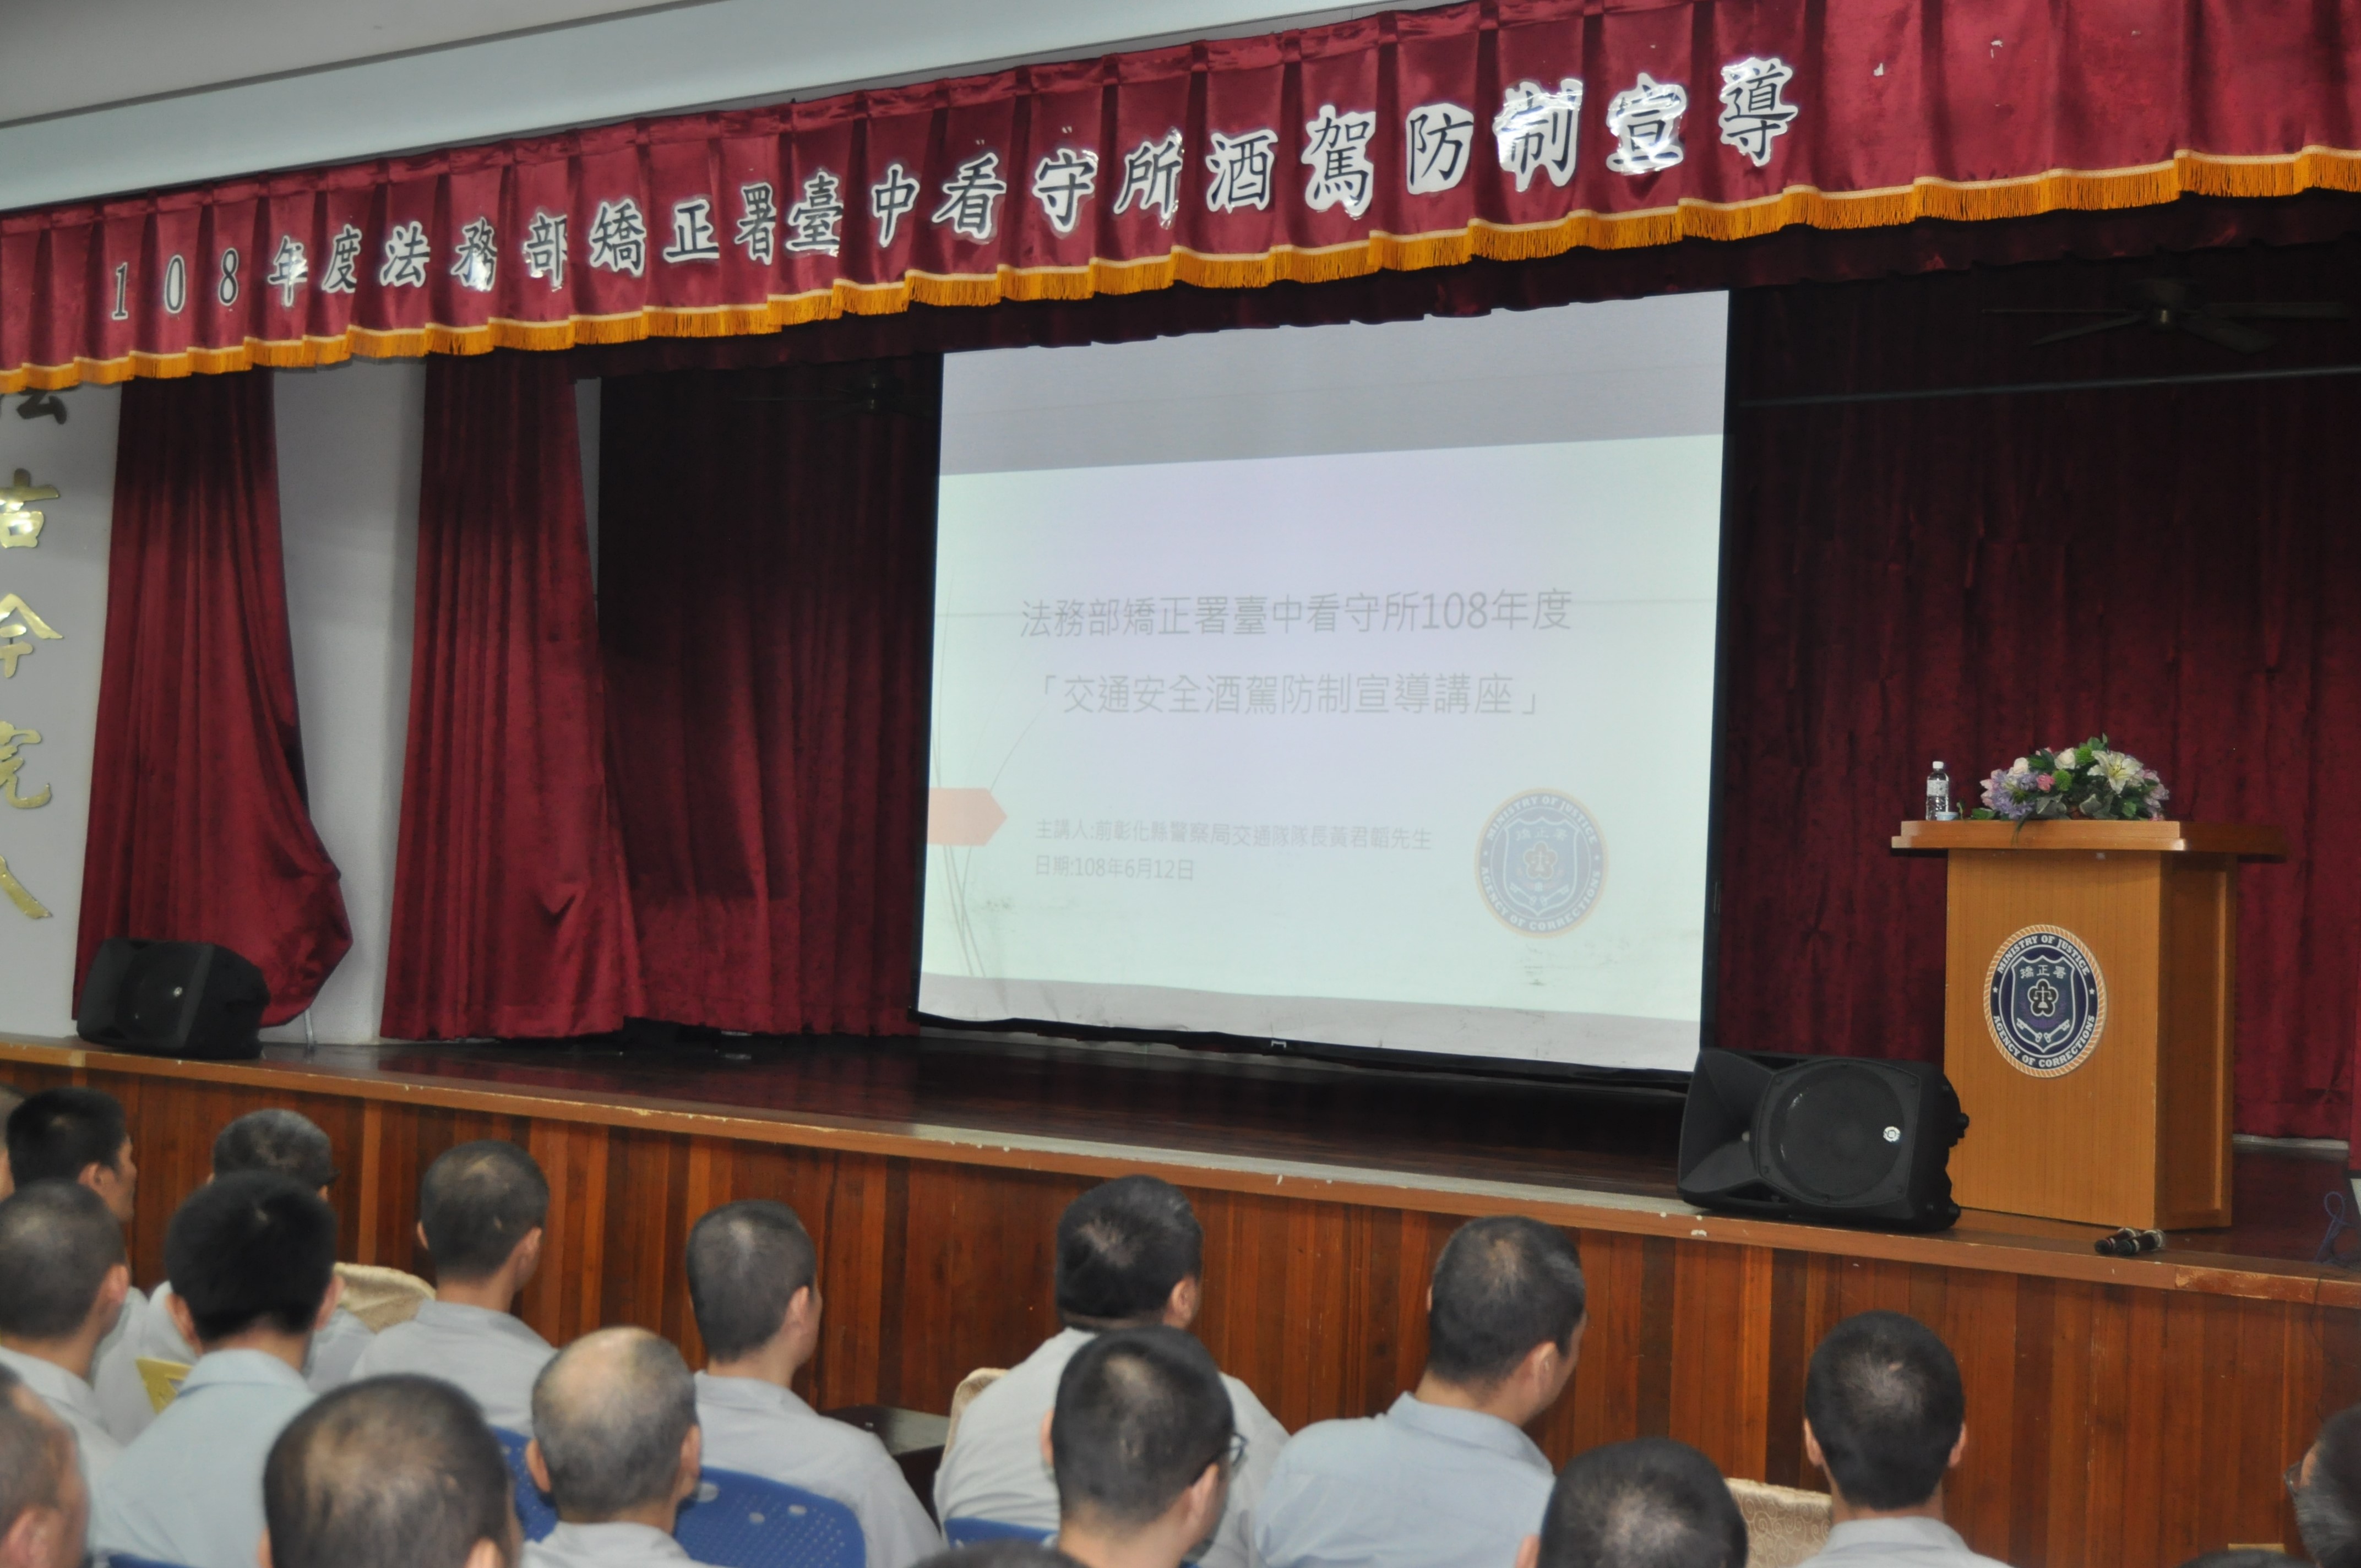 108-year prevention of drunk driving traffic security lecture